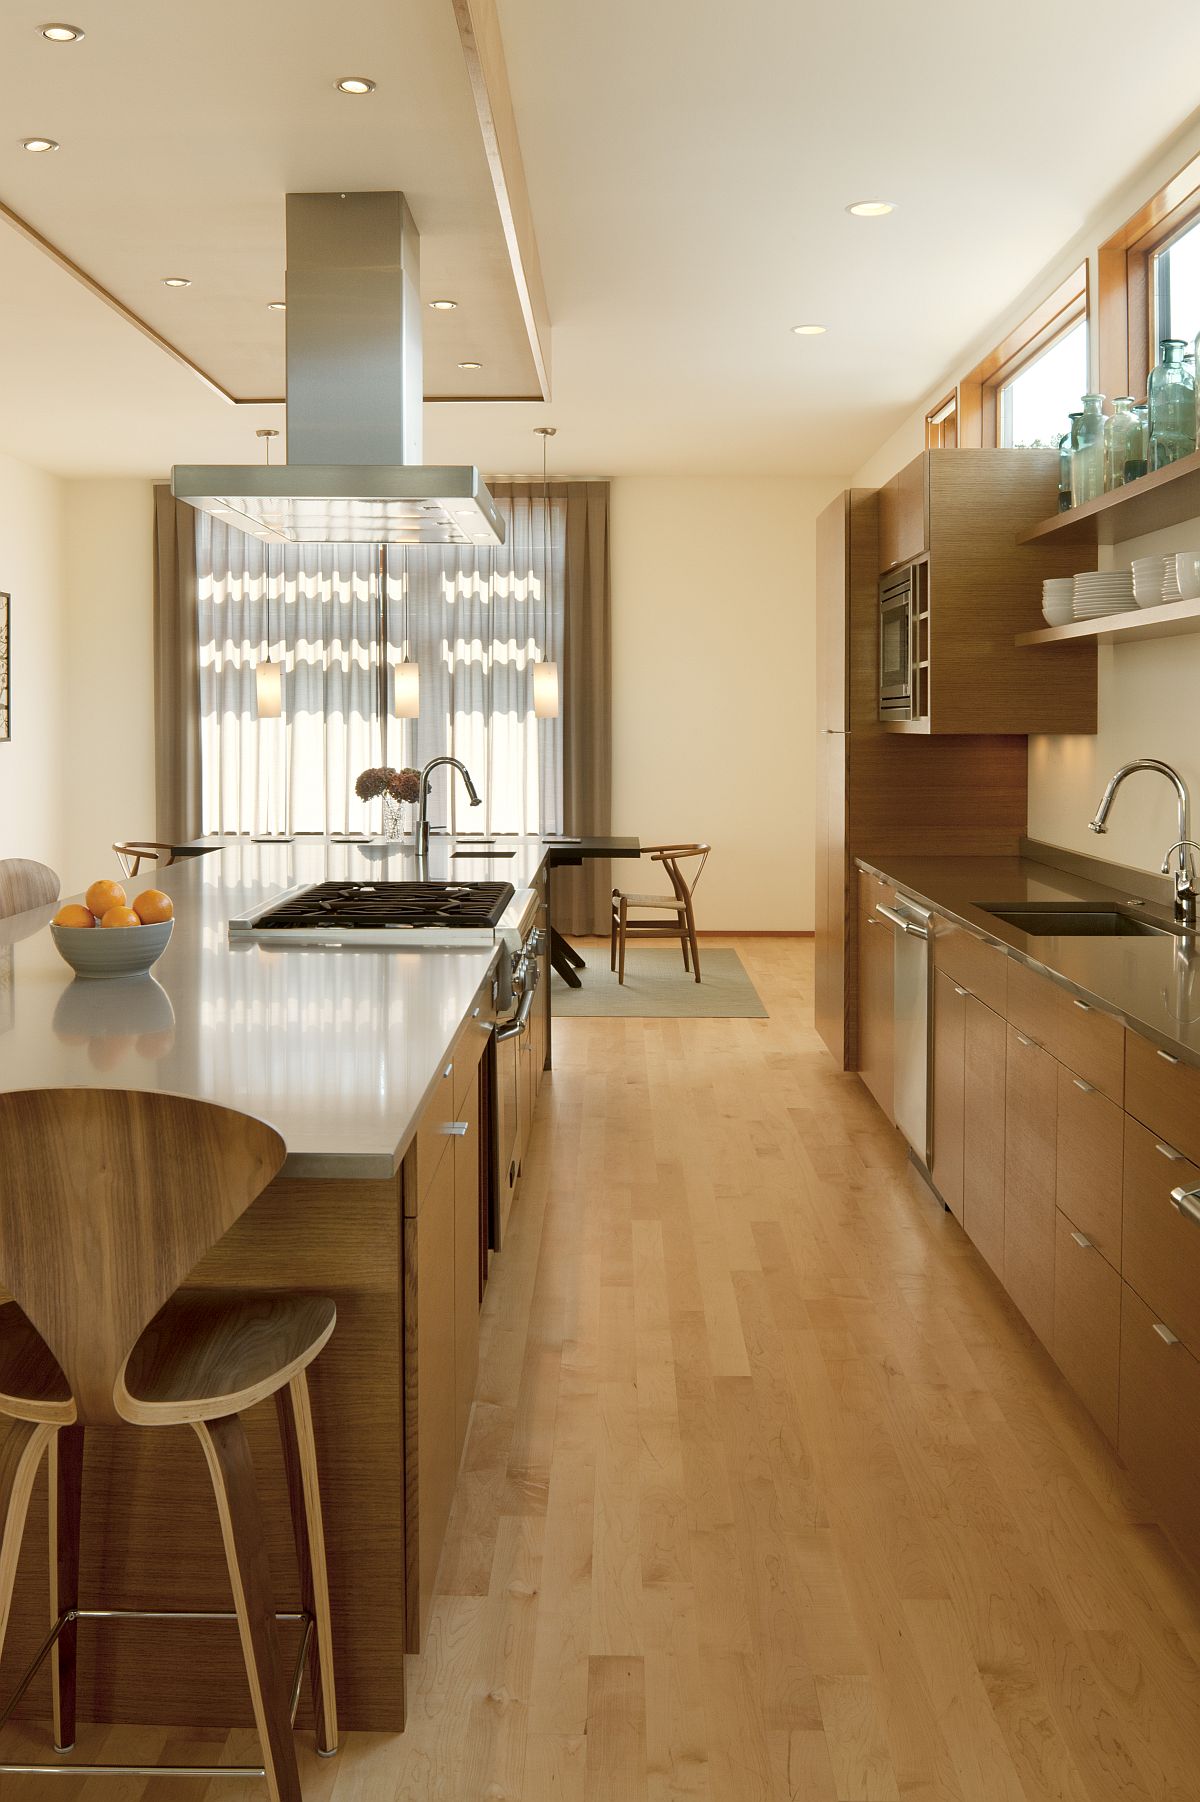 Wood and white along with beige create a kitchen where accent colors really stand out